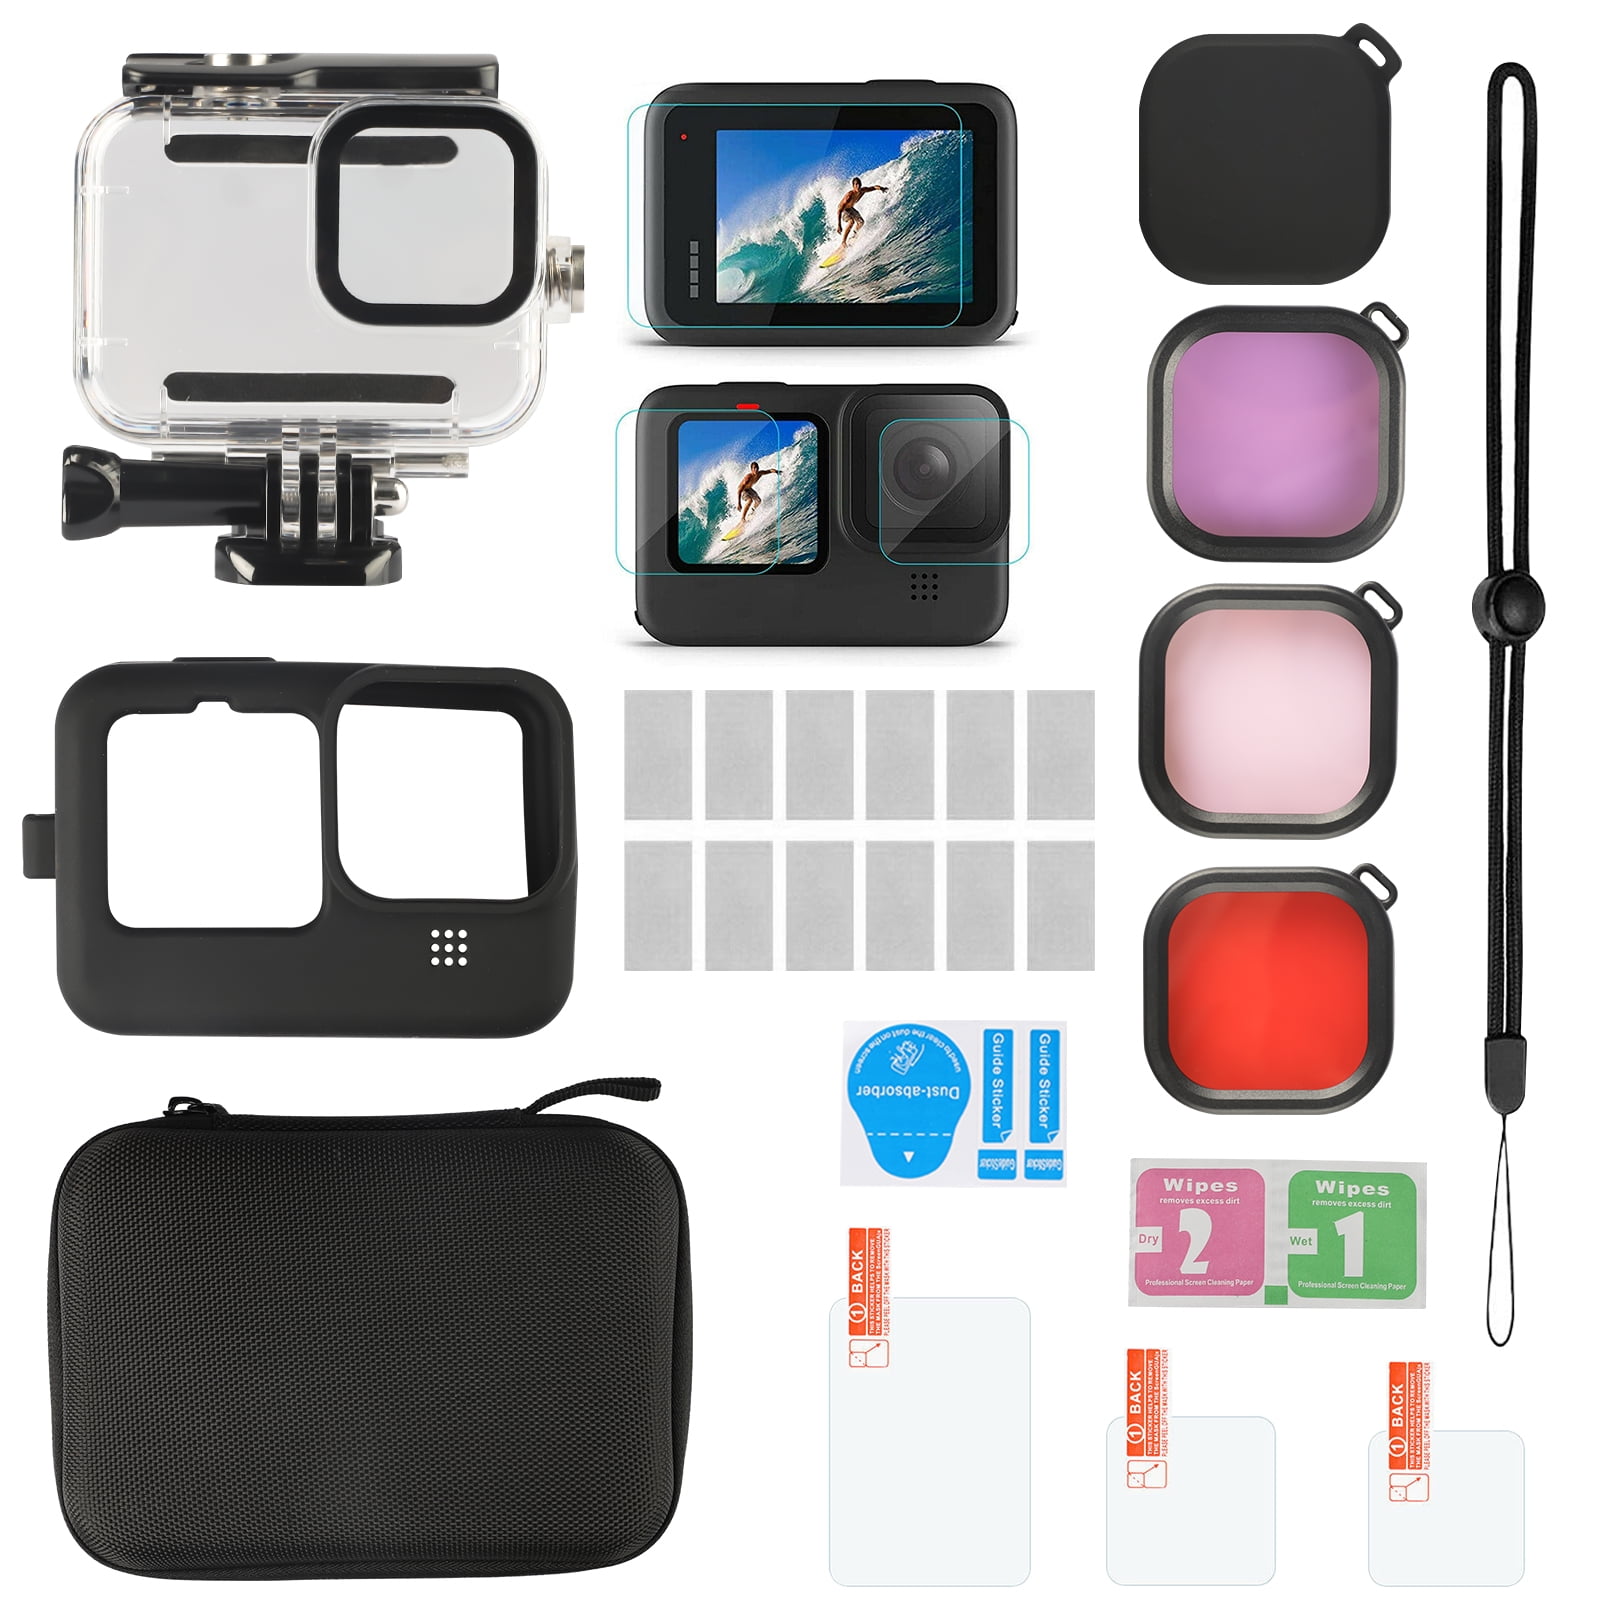 EVA Hardshell Weatherproof Carrying Case For GoPro HERO 1/2 Or 3/4 With LCD Back 